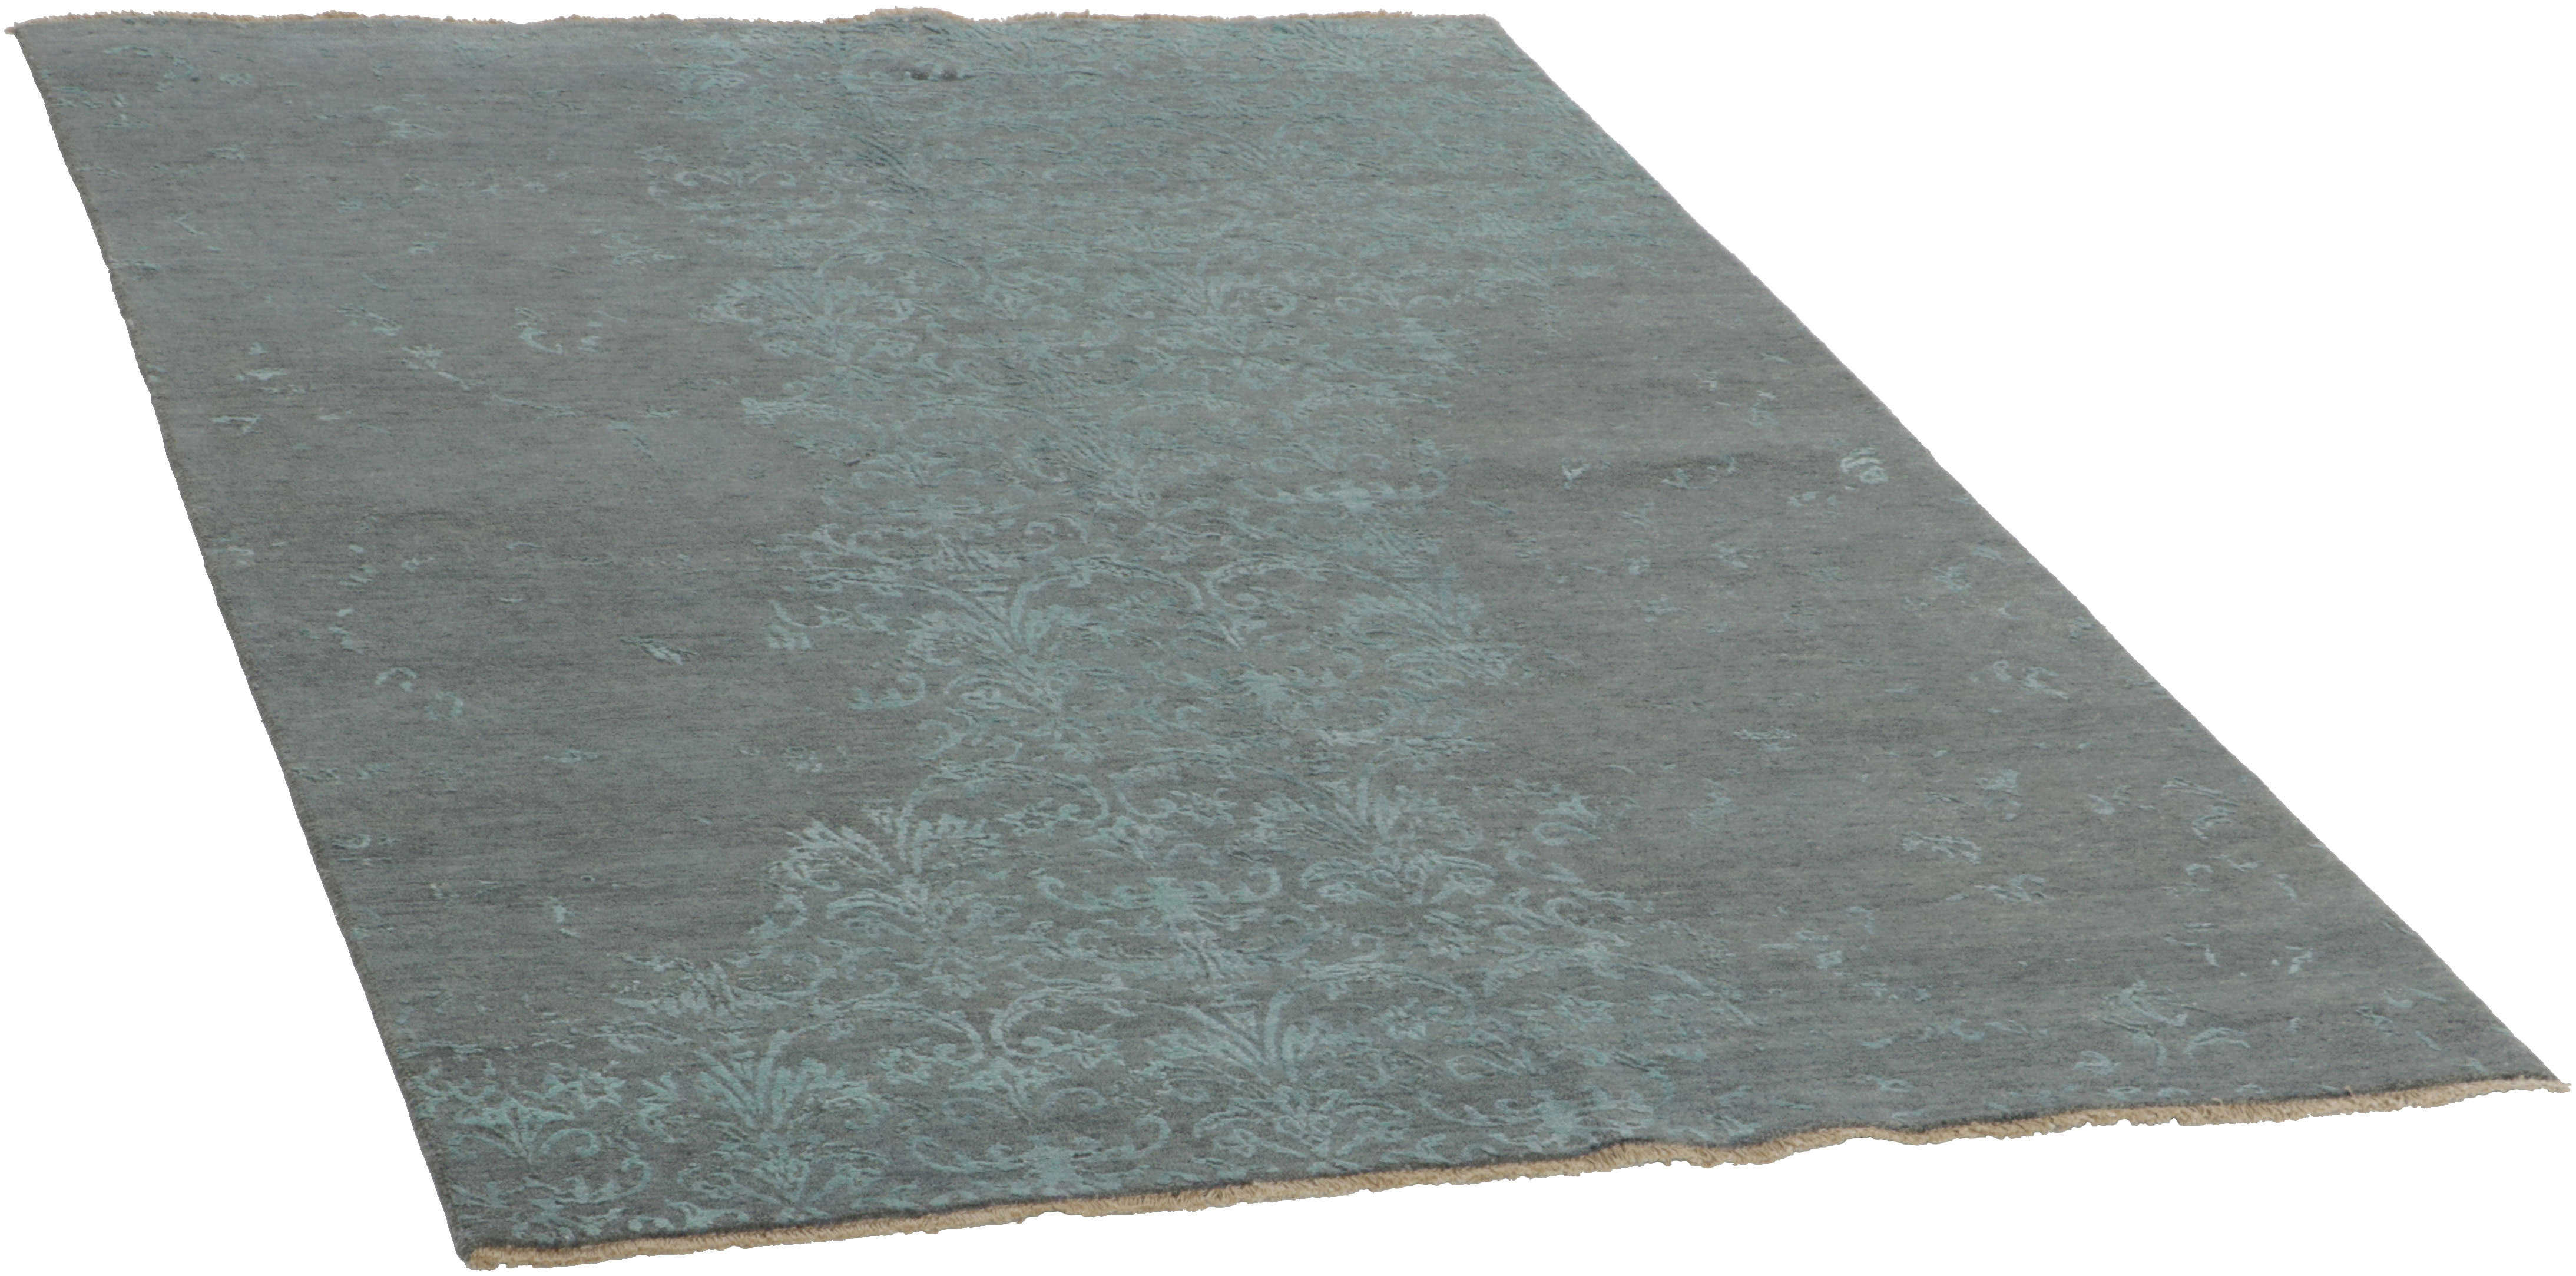 Authentic oriental rug with a damask pattern in blue